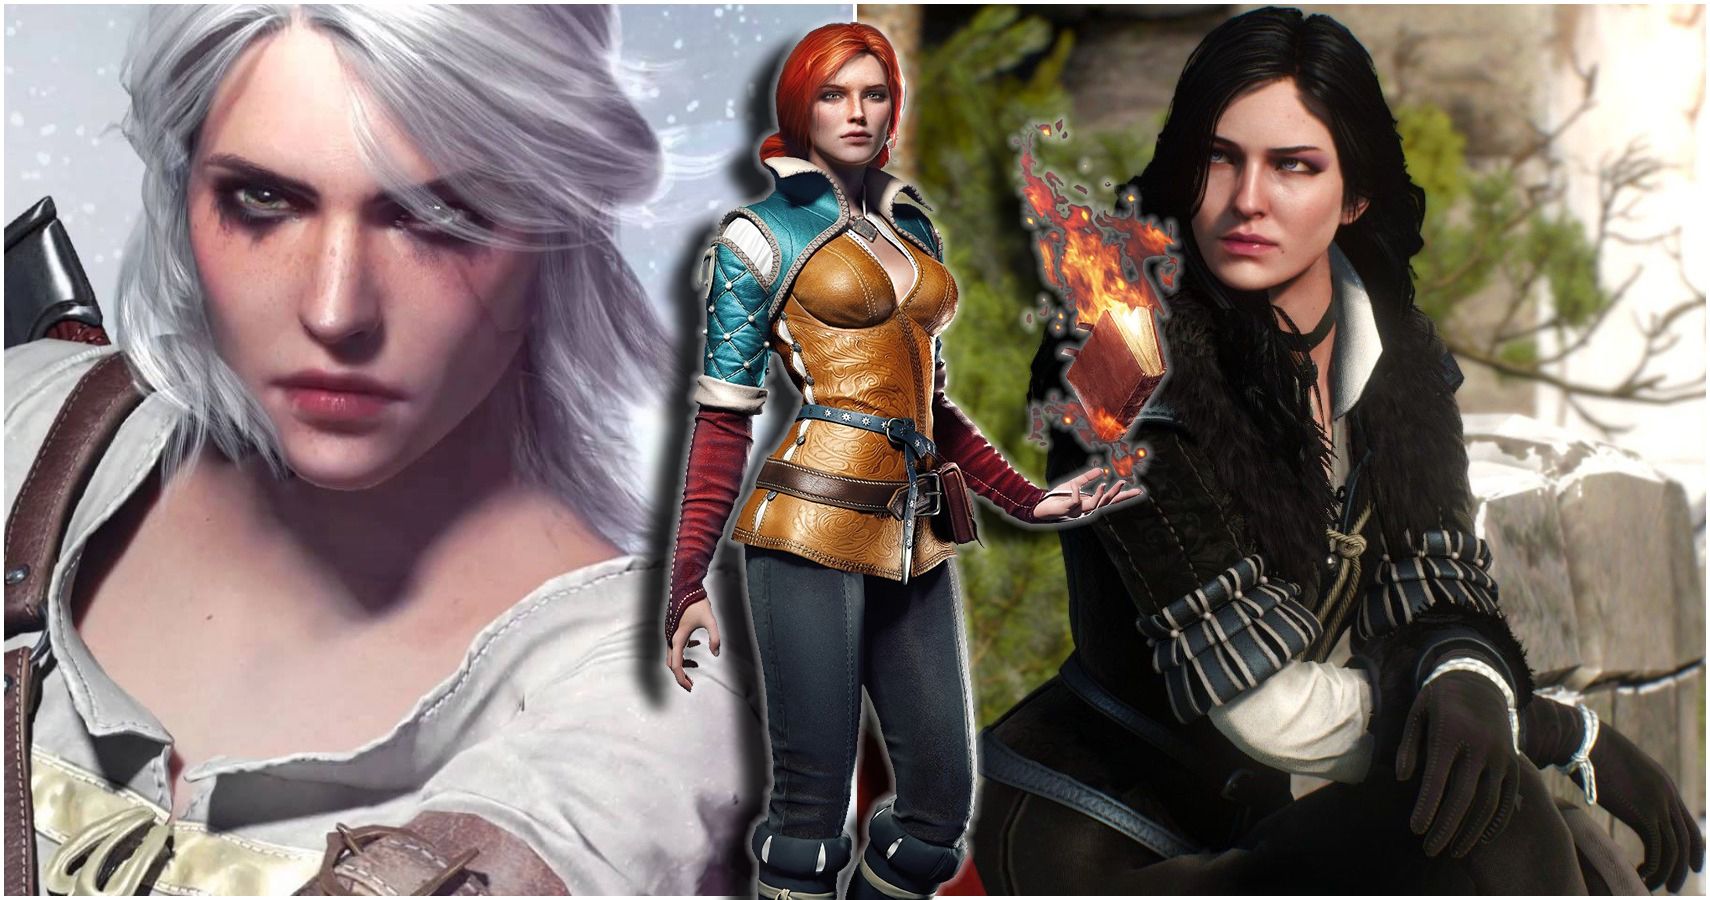 Creating The Fierce Women Of The Witcher 3 - Game Informer